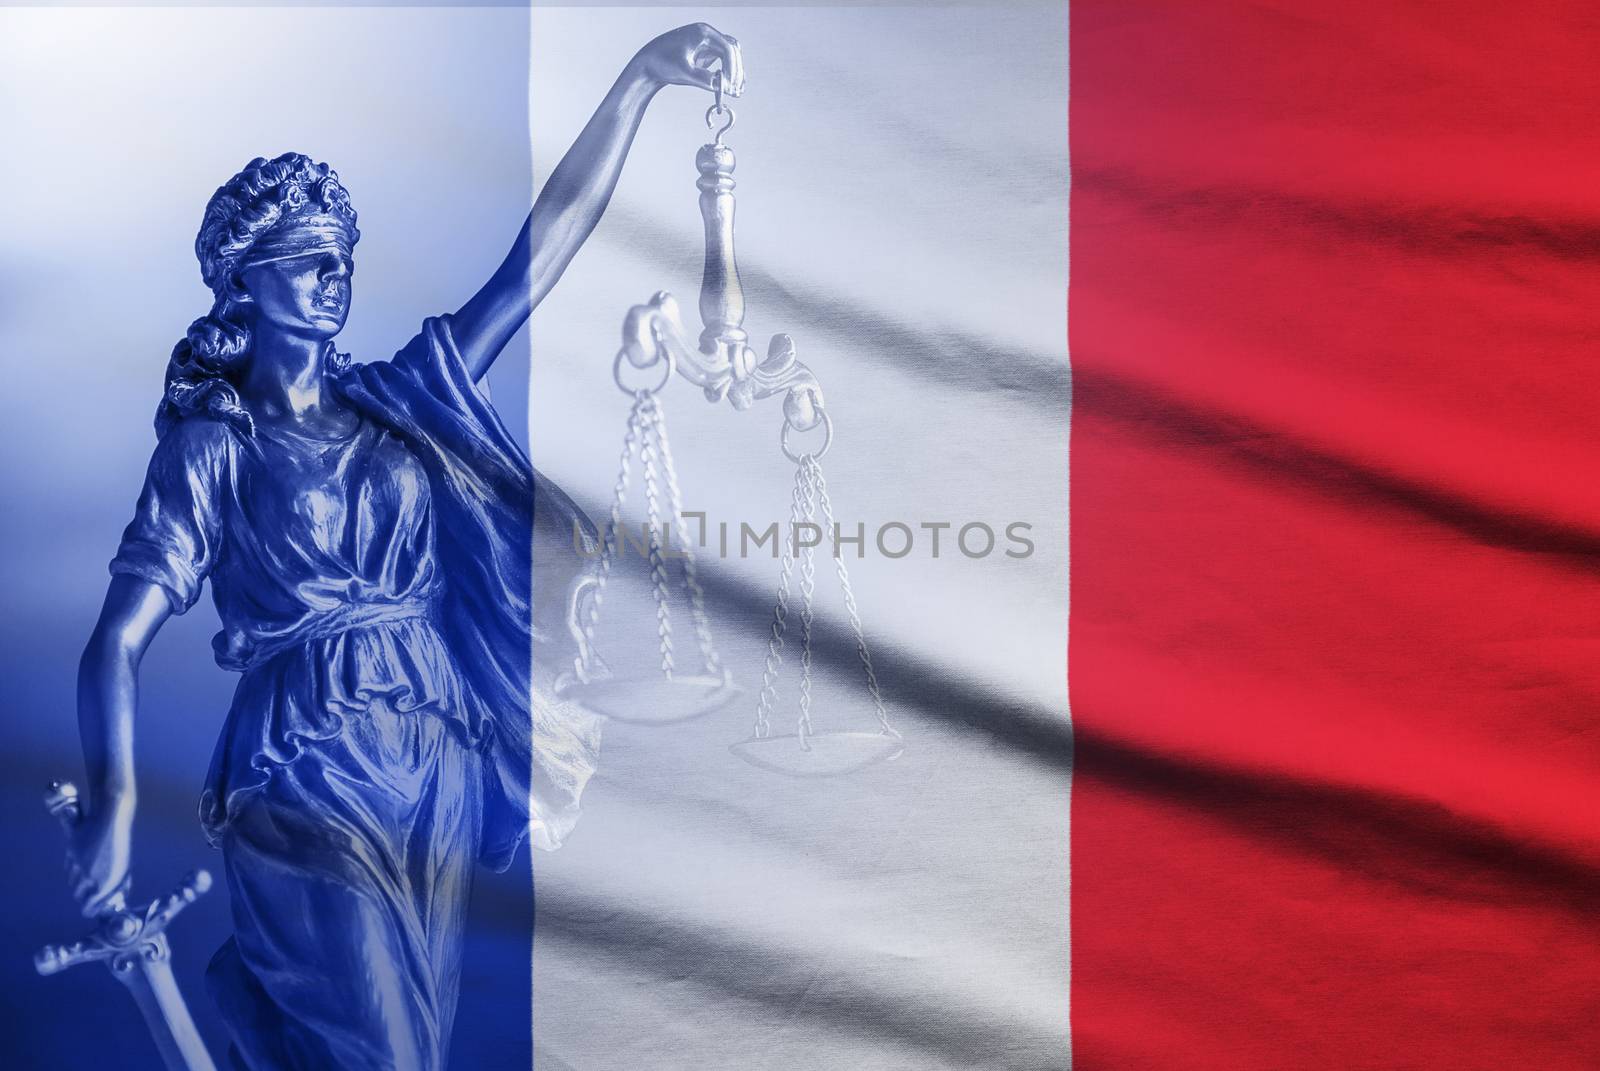 National flag of France with a statue of Justice holding the scales and sword of impartiality and law enforcement